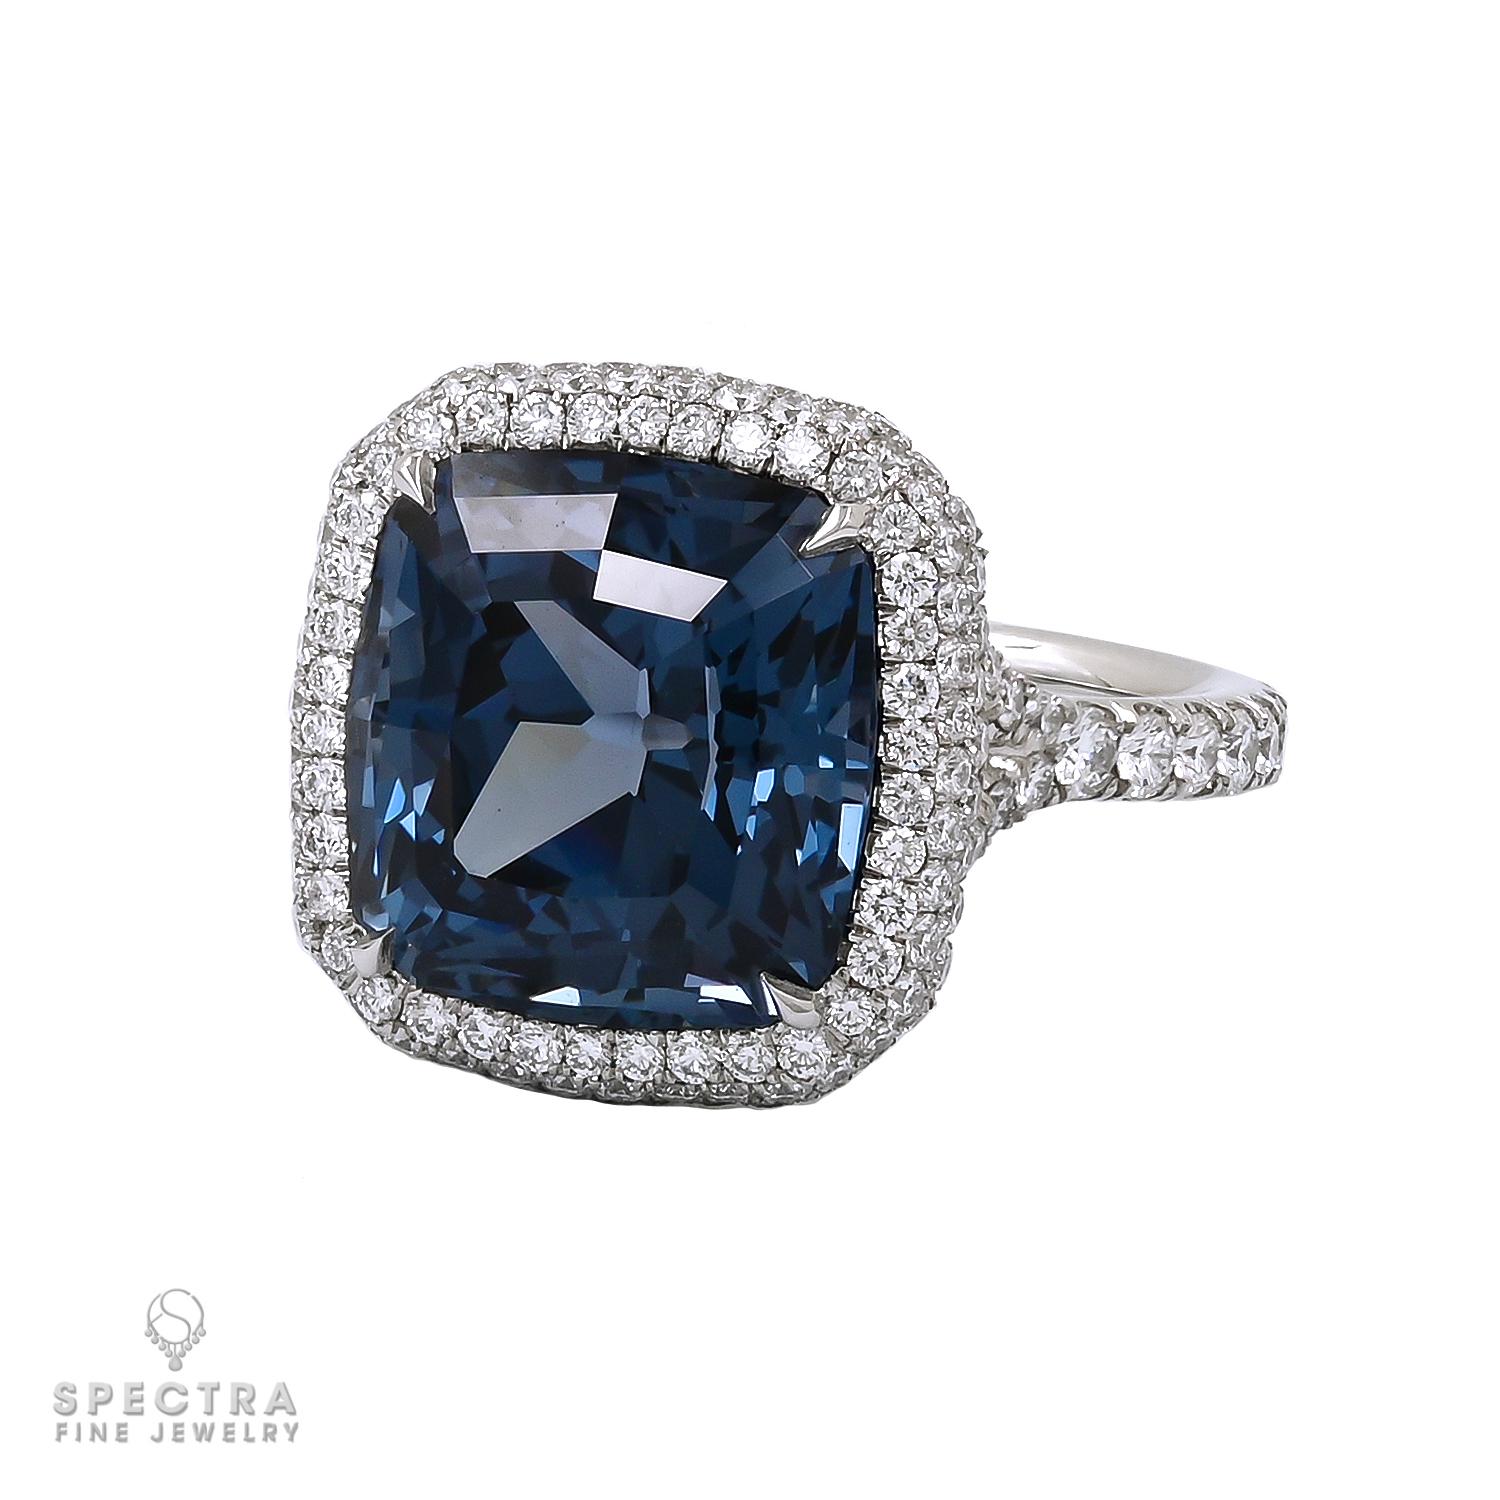 Presenting this magnificent 8.46-carat Cobalt Blue Spinel Ring by Spectra Fine Jewelry. Its cushion-cut center stone showcases an awe-inspiring 8.46-carat Ceylon gem, certified by AGL and GRS as a rare 